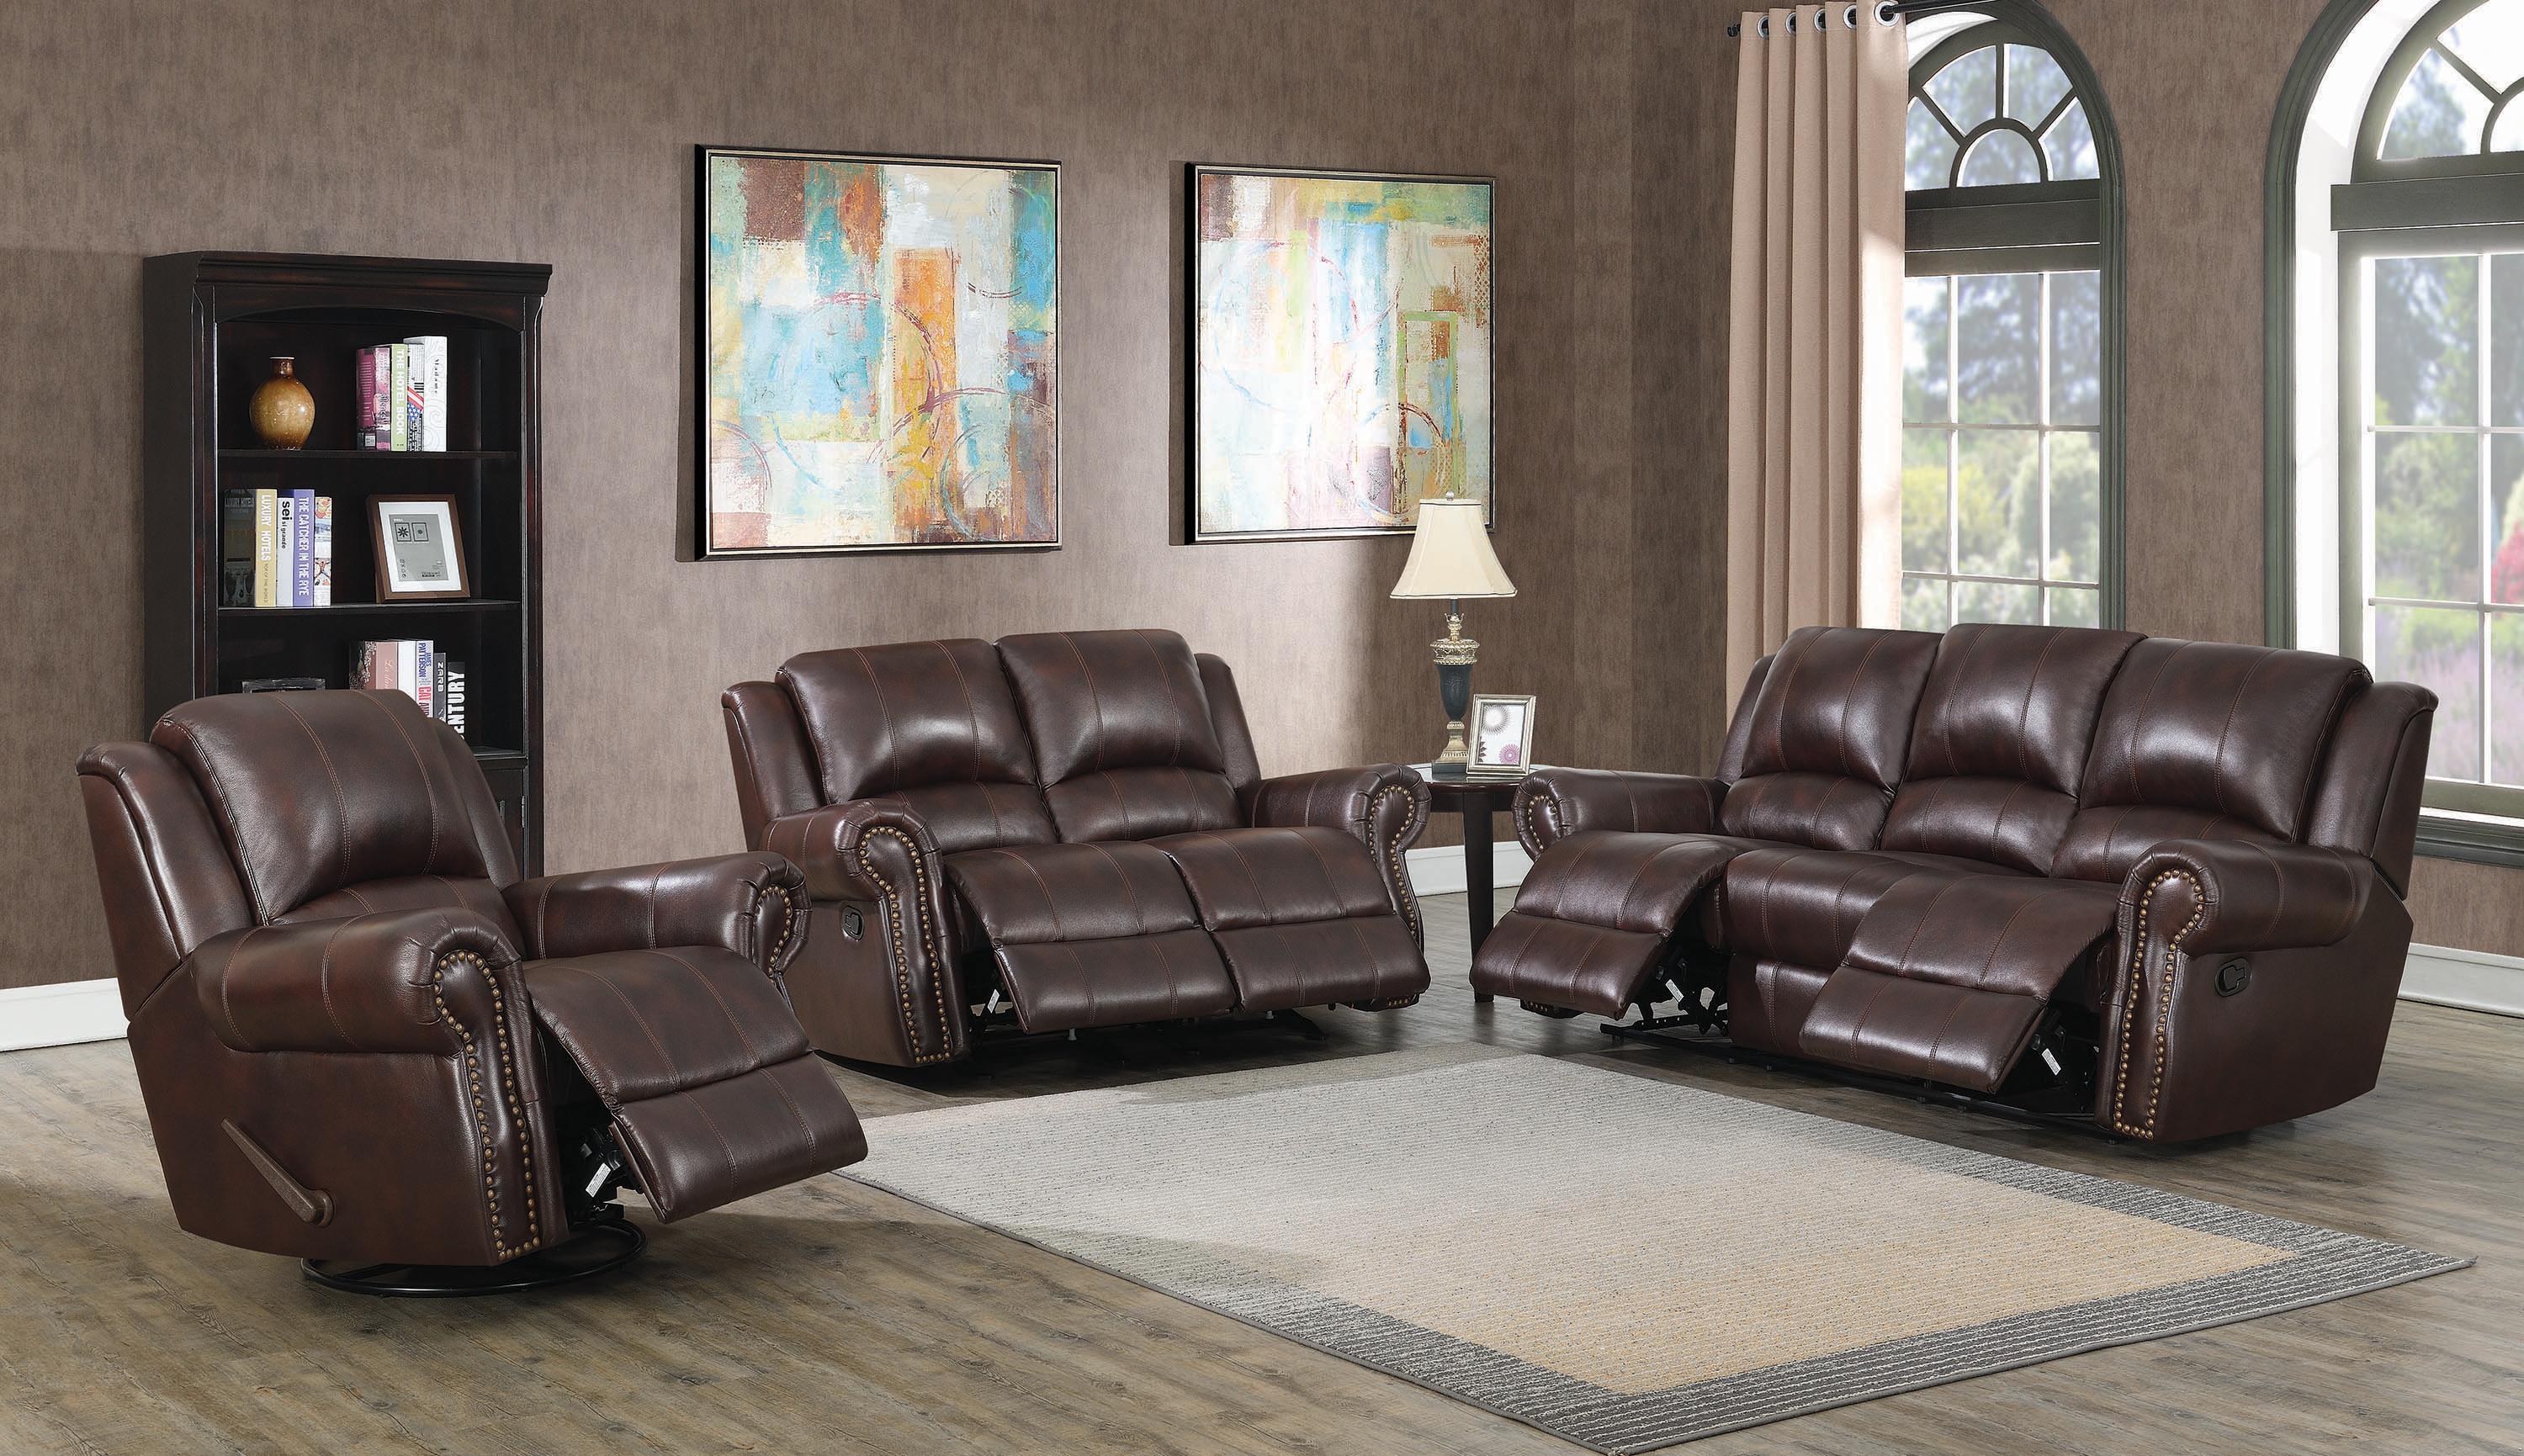 

    
Traditional Dark Brown Leather Living Room Set 3pcs Coaster 650161-S3 Sir Rawlinson
